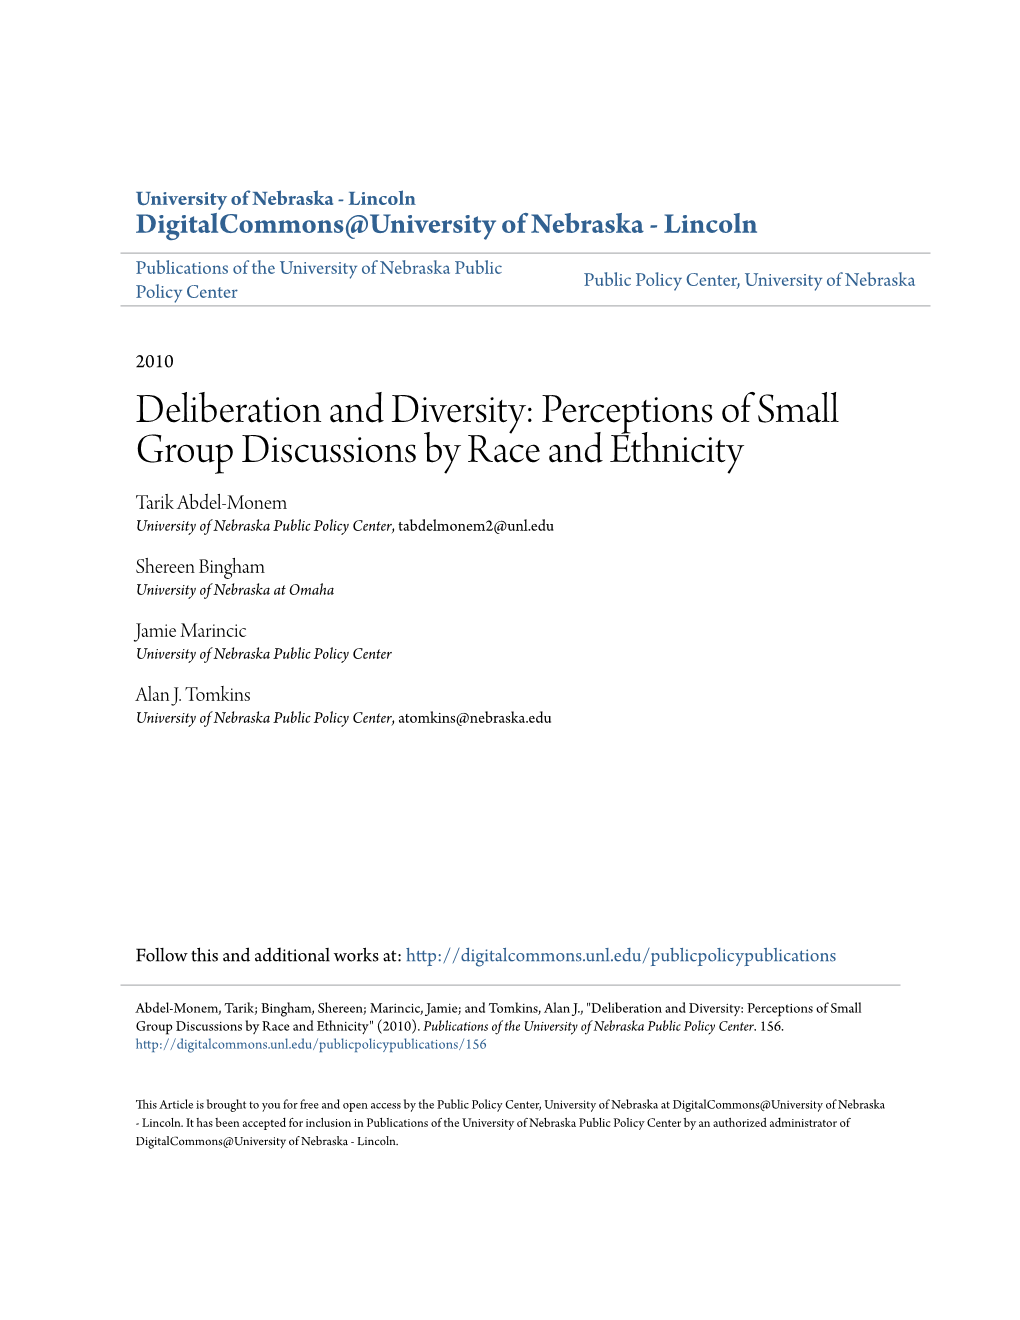 Deliberation and Diversity